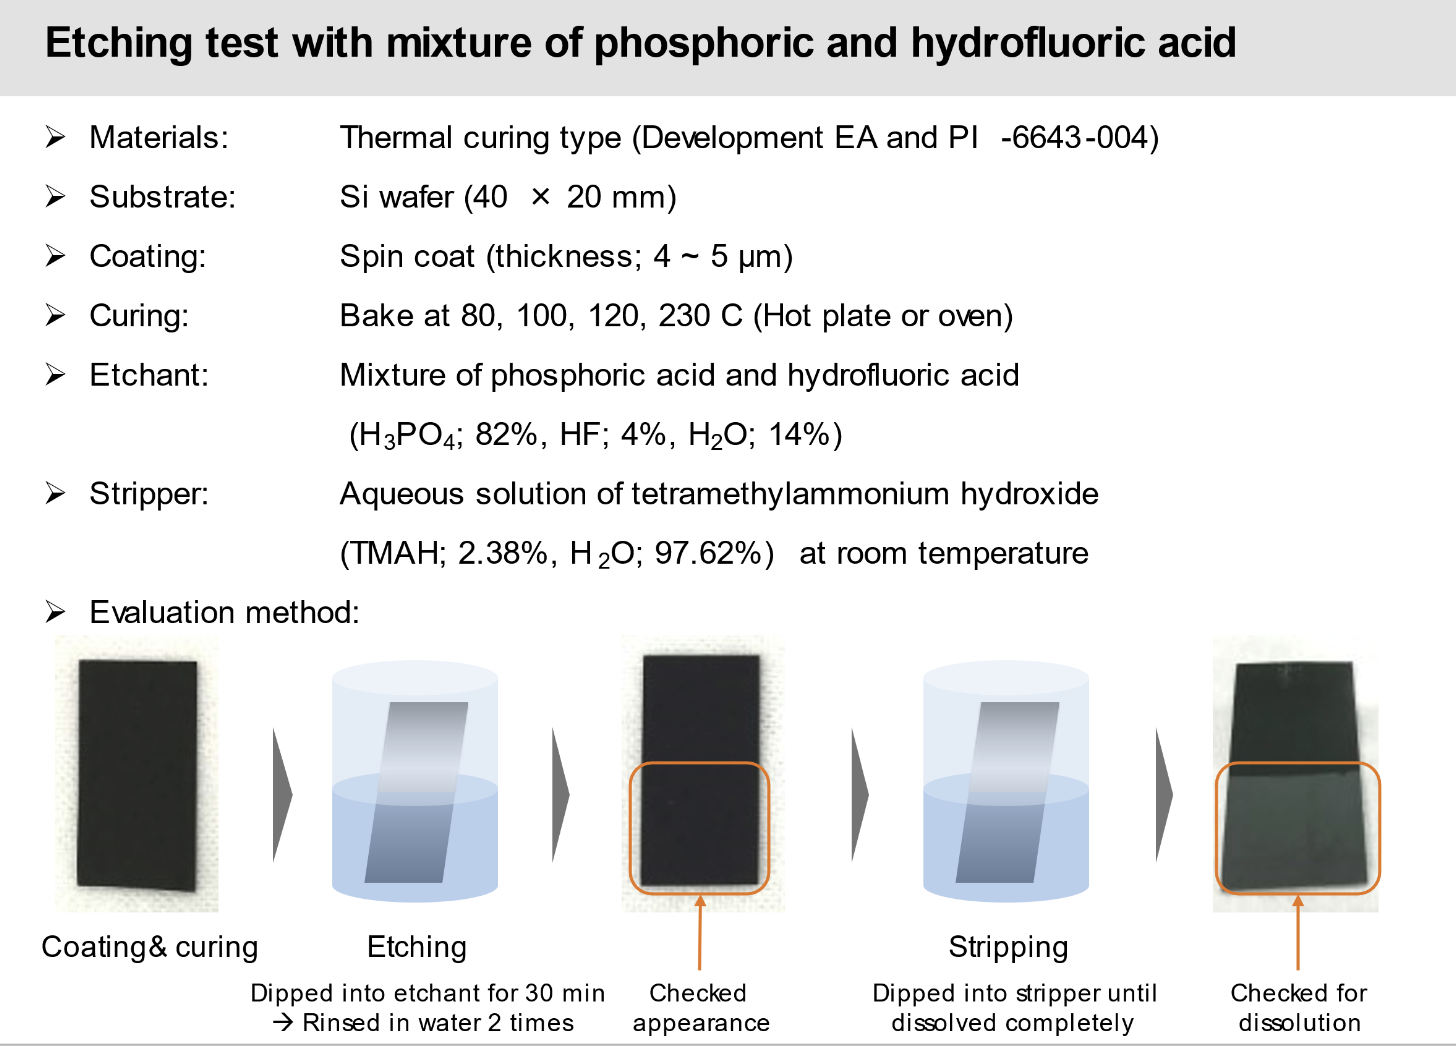 Etching test with mixture of phosphoric and hydrofluoric acid